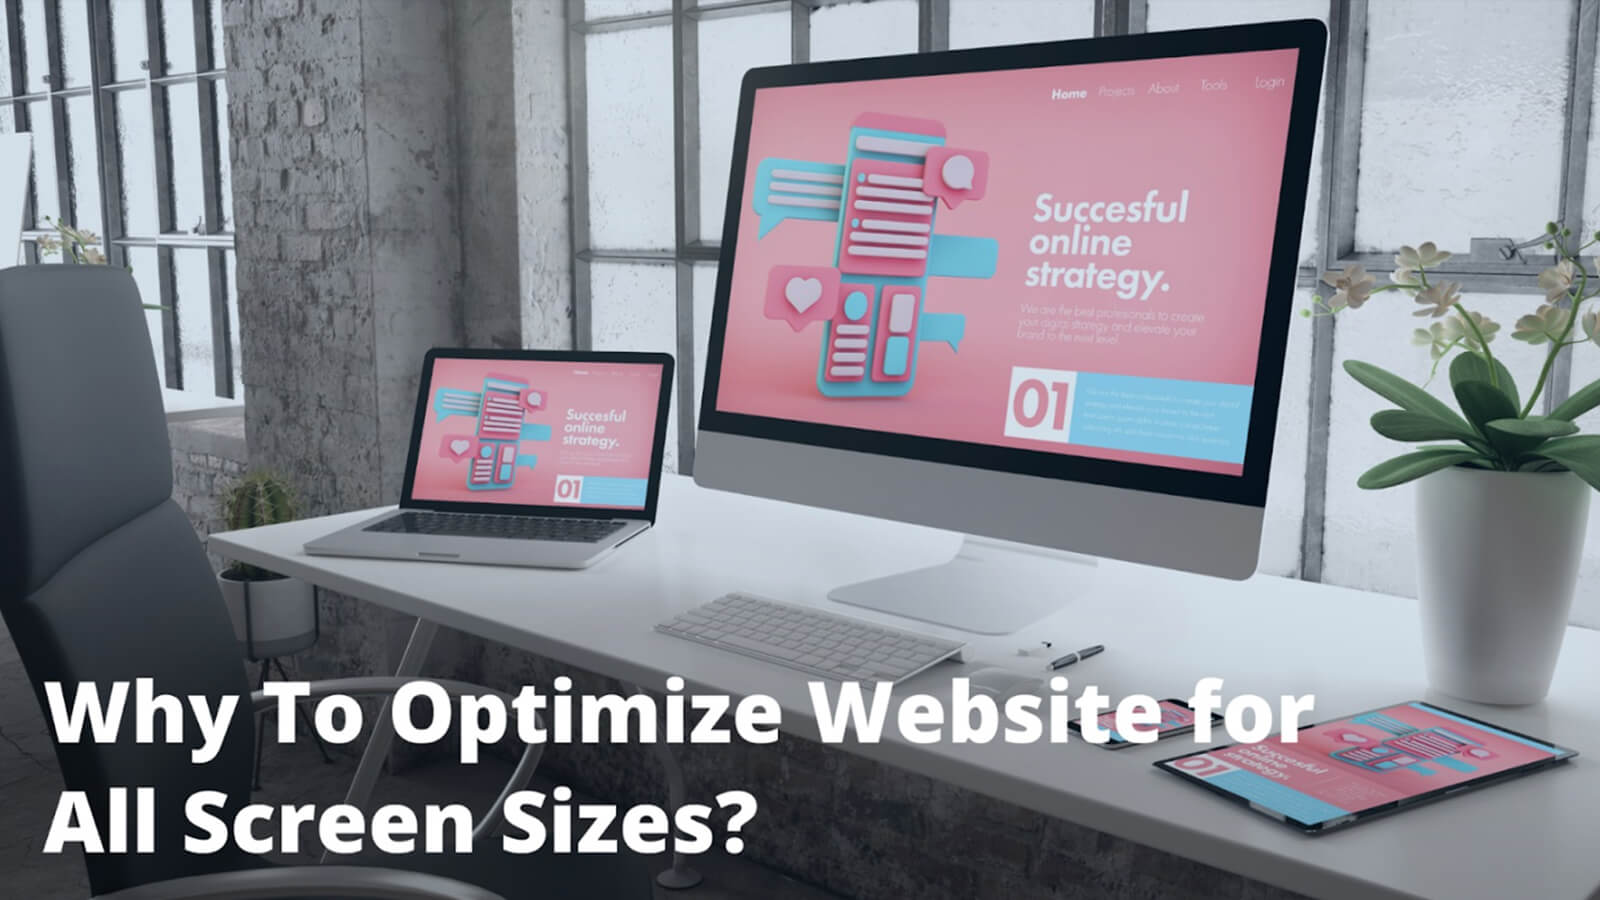 Best Practices to Optimize Website for all Screen